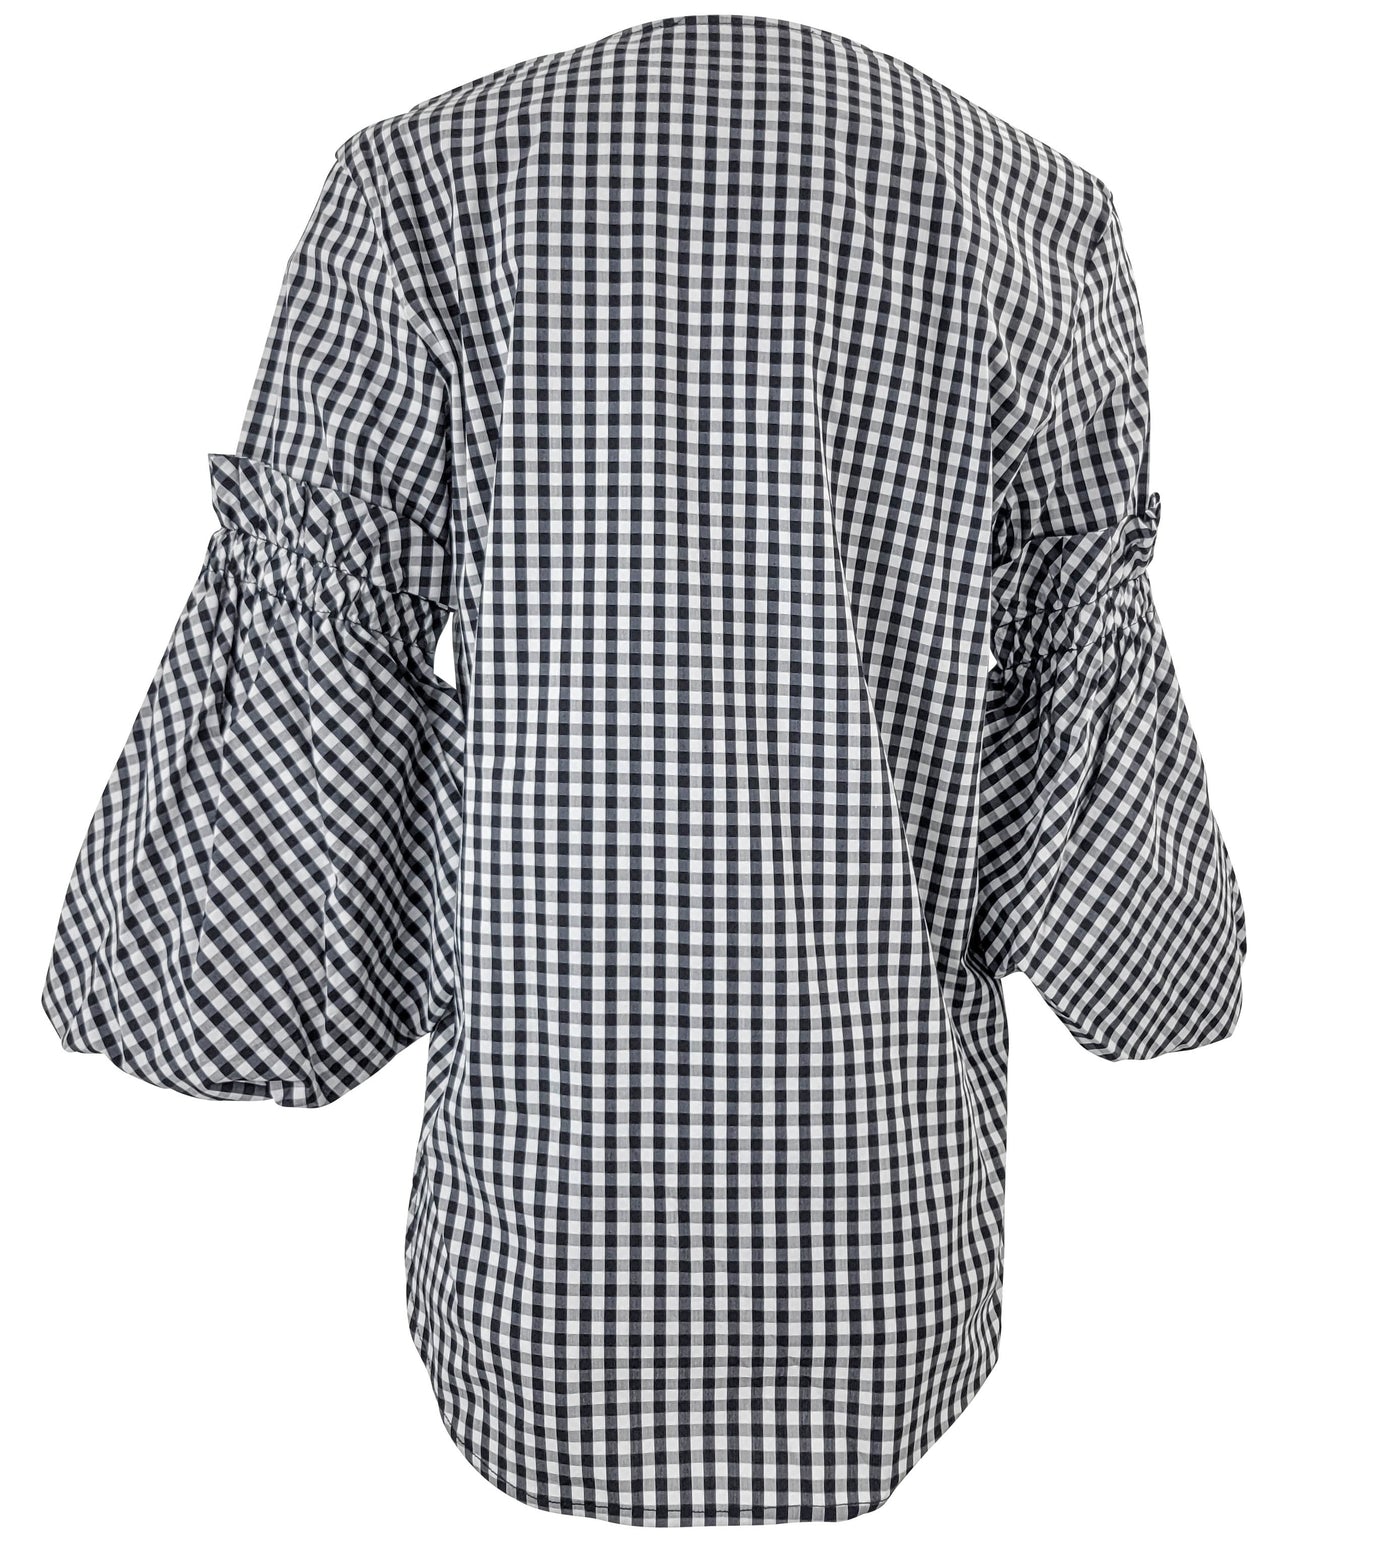 Silvia Tcherassi Lucaya Blouse in Black Embroidered Gingham - Discounts on Silvia Tcherassi at UAL